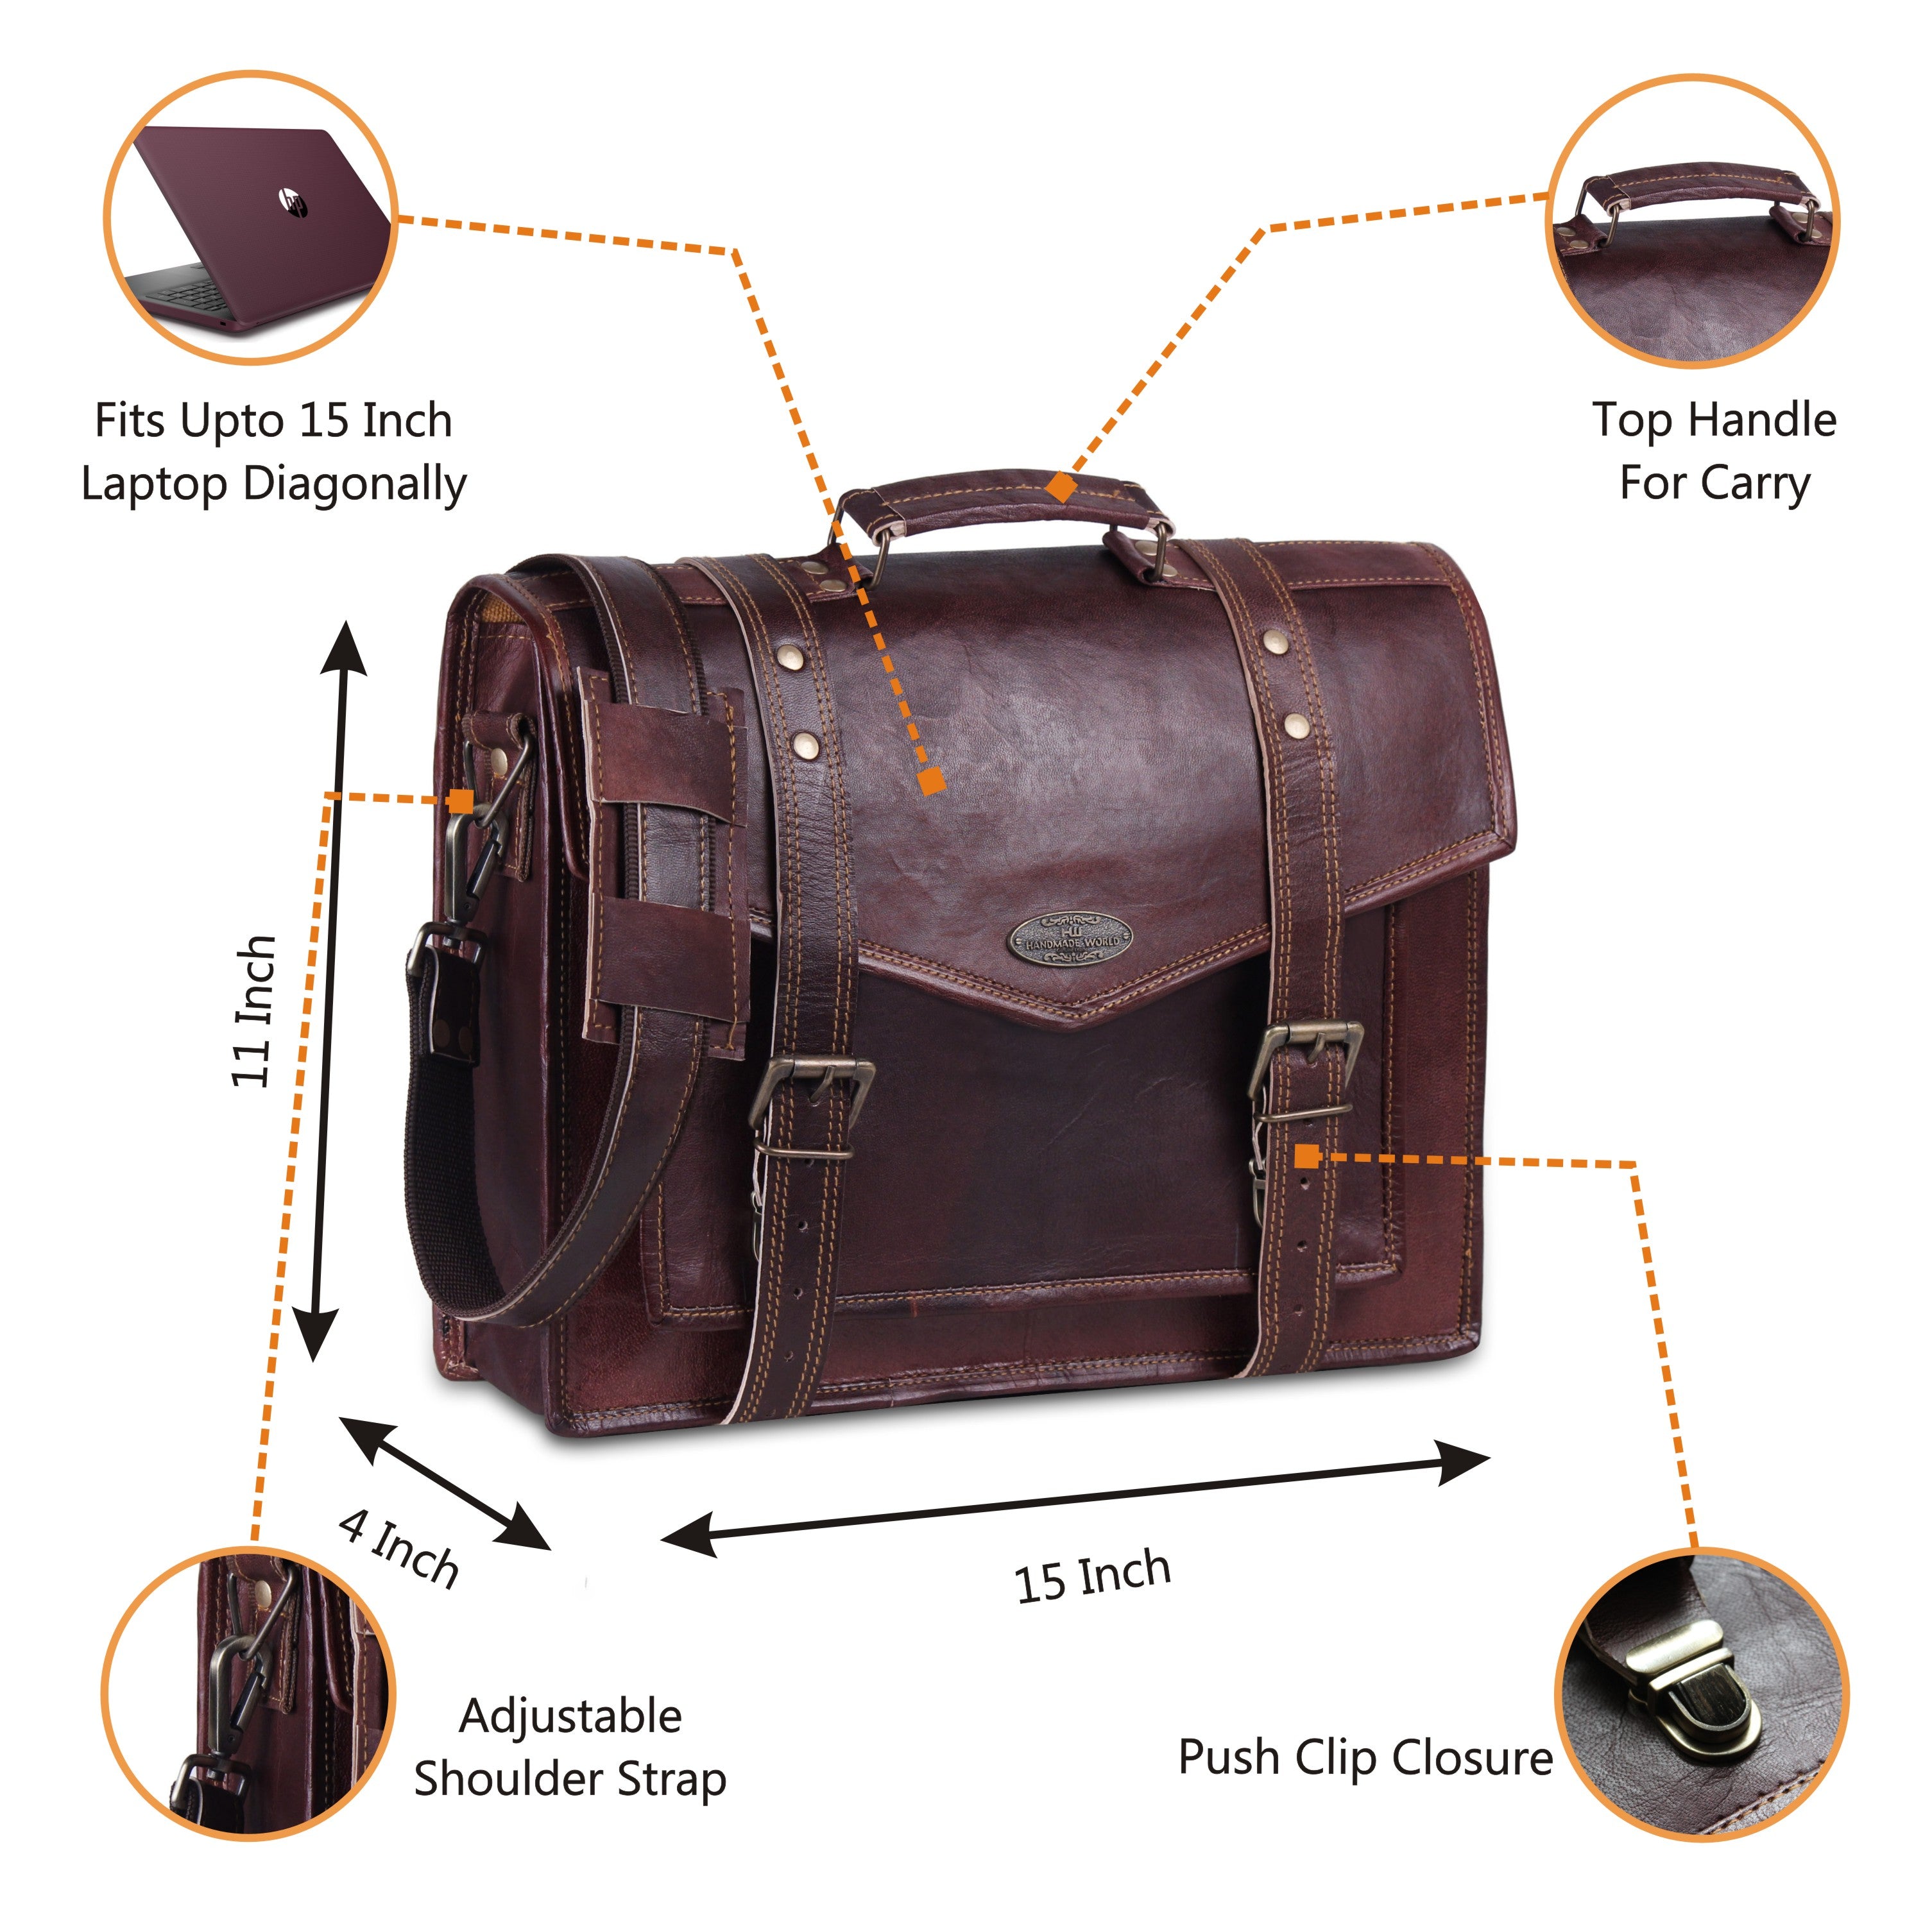 Features of Large Leather Messenger Bag with Push Lock and Top Handle